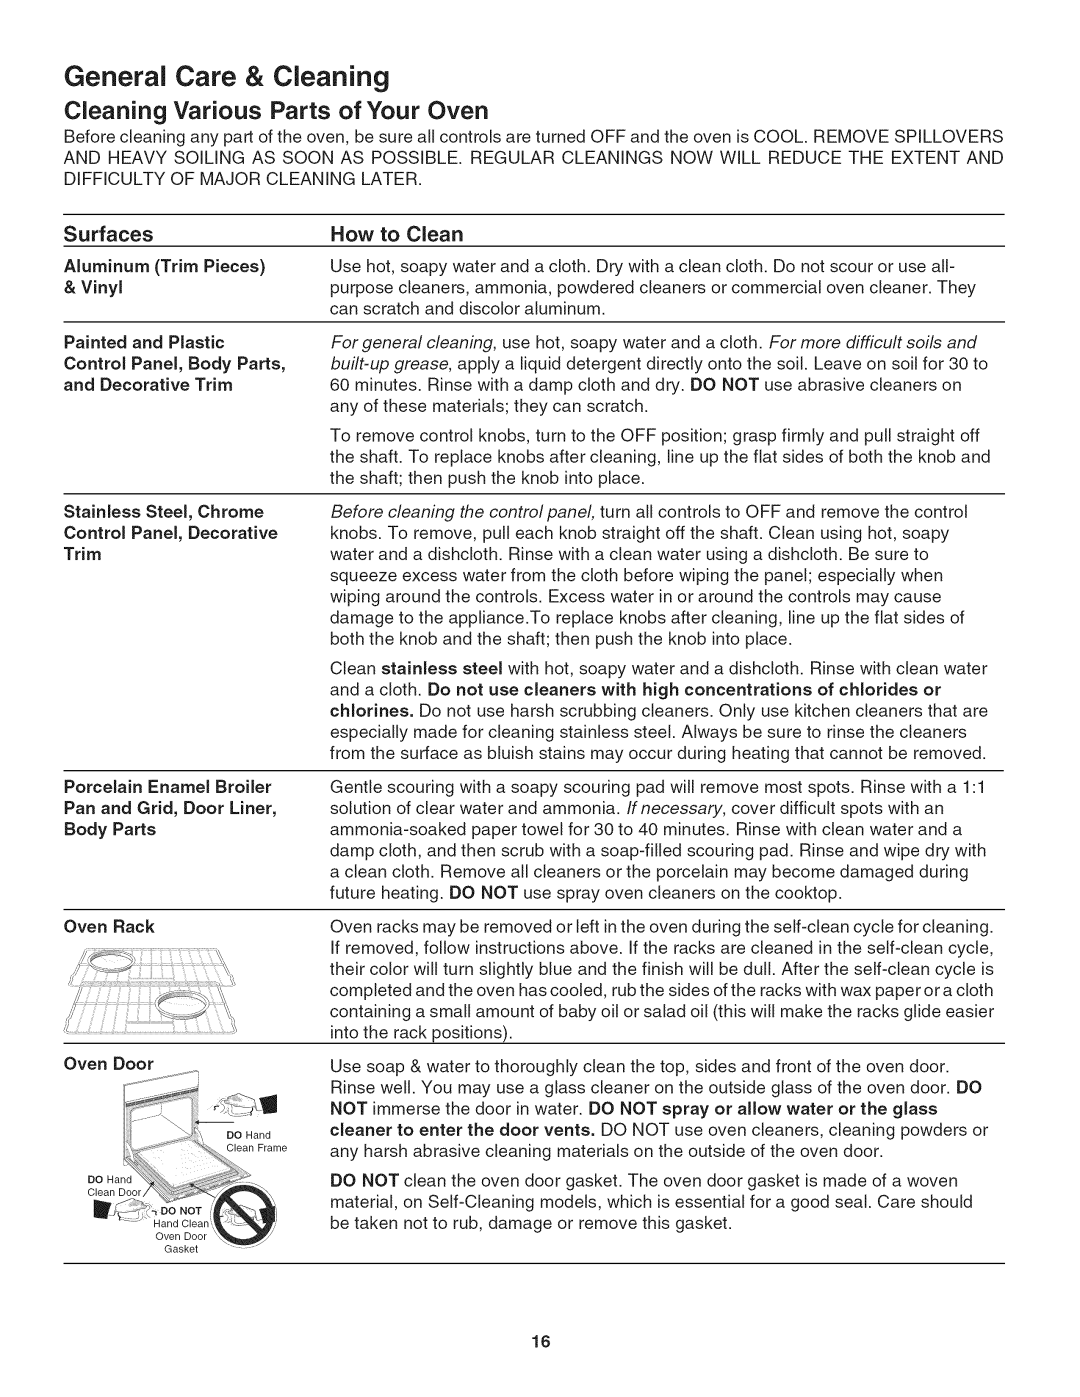 Kenmore 790. 4045 manual General Care & Cleaning, Cleaning Various Parts of Your Oven, Surfaces 